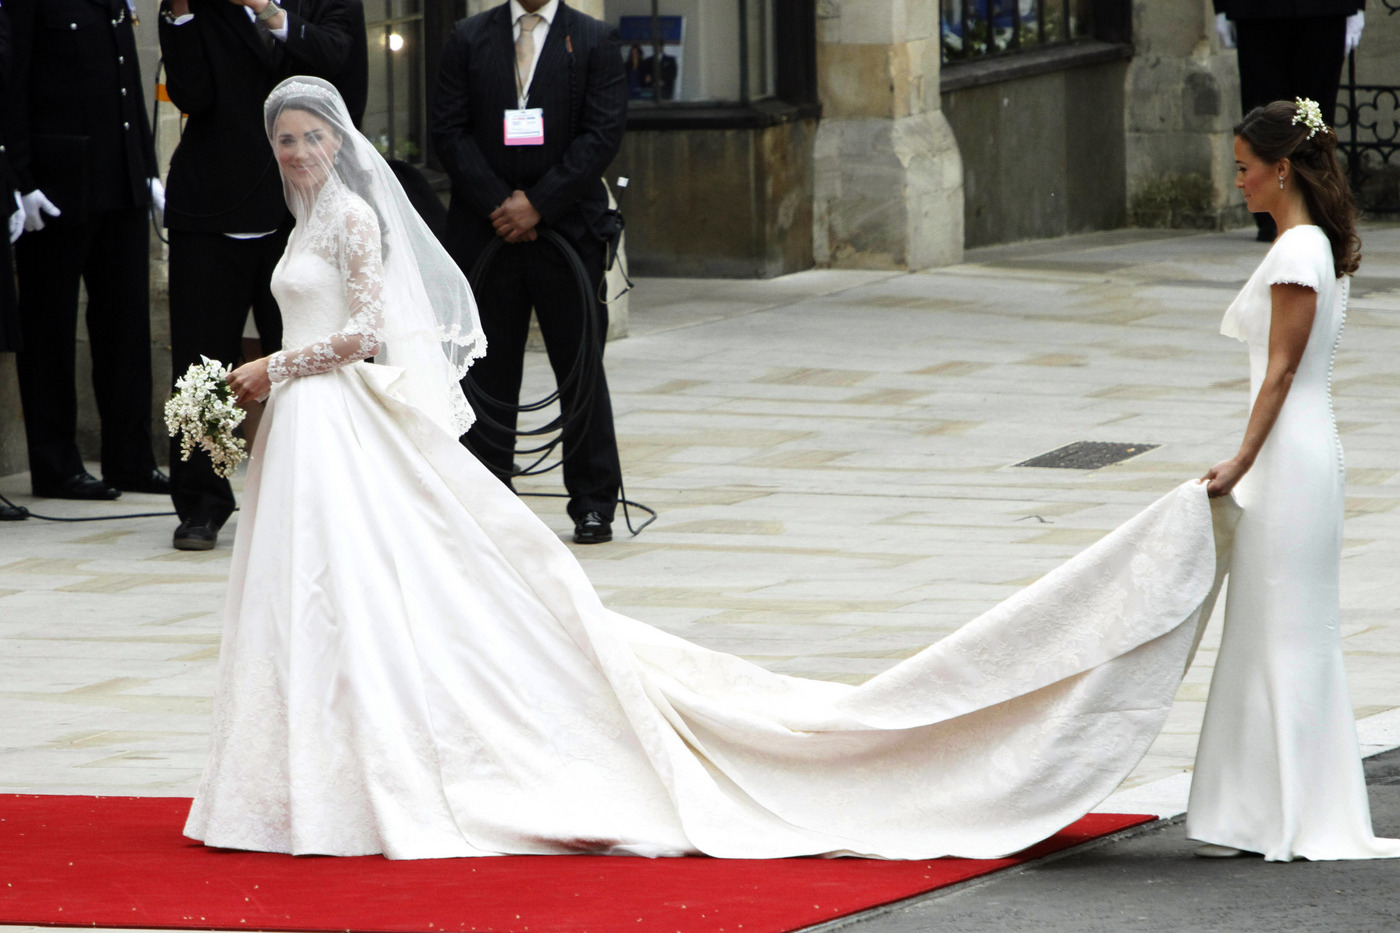 54305, LONDON, UNITED KINGDOM - Friday April 29 2011. Kate Middleton reveals her McQueen gown as she arrives with sister Pippa at Westminster Abbey. Masses of crowds lined the streets to catch a glimpse of the new Duke and Duchess of Cambridge emerge from the church. **NORTH AMERICAN USE ONLY*** Photograph: ©PacificCoastNews.com **FEE MUST BE AGREED PRIOR TO USAGE** **E-TABLET/IPAD & MOBILE PHONE APP PUBLISHING REQUIRES ADDITIONAL FEES** UK OFFICE:+44 131 557 7760/7761 US OFFICE:1 310 261 9676